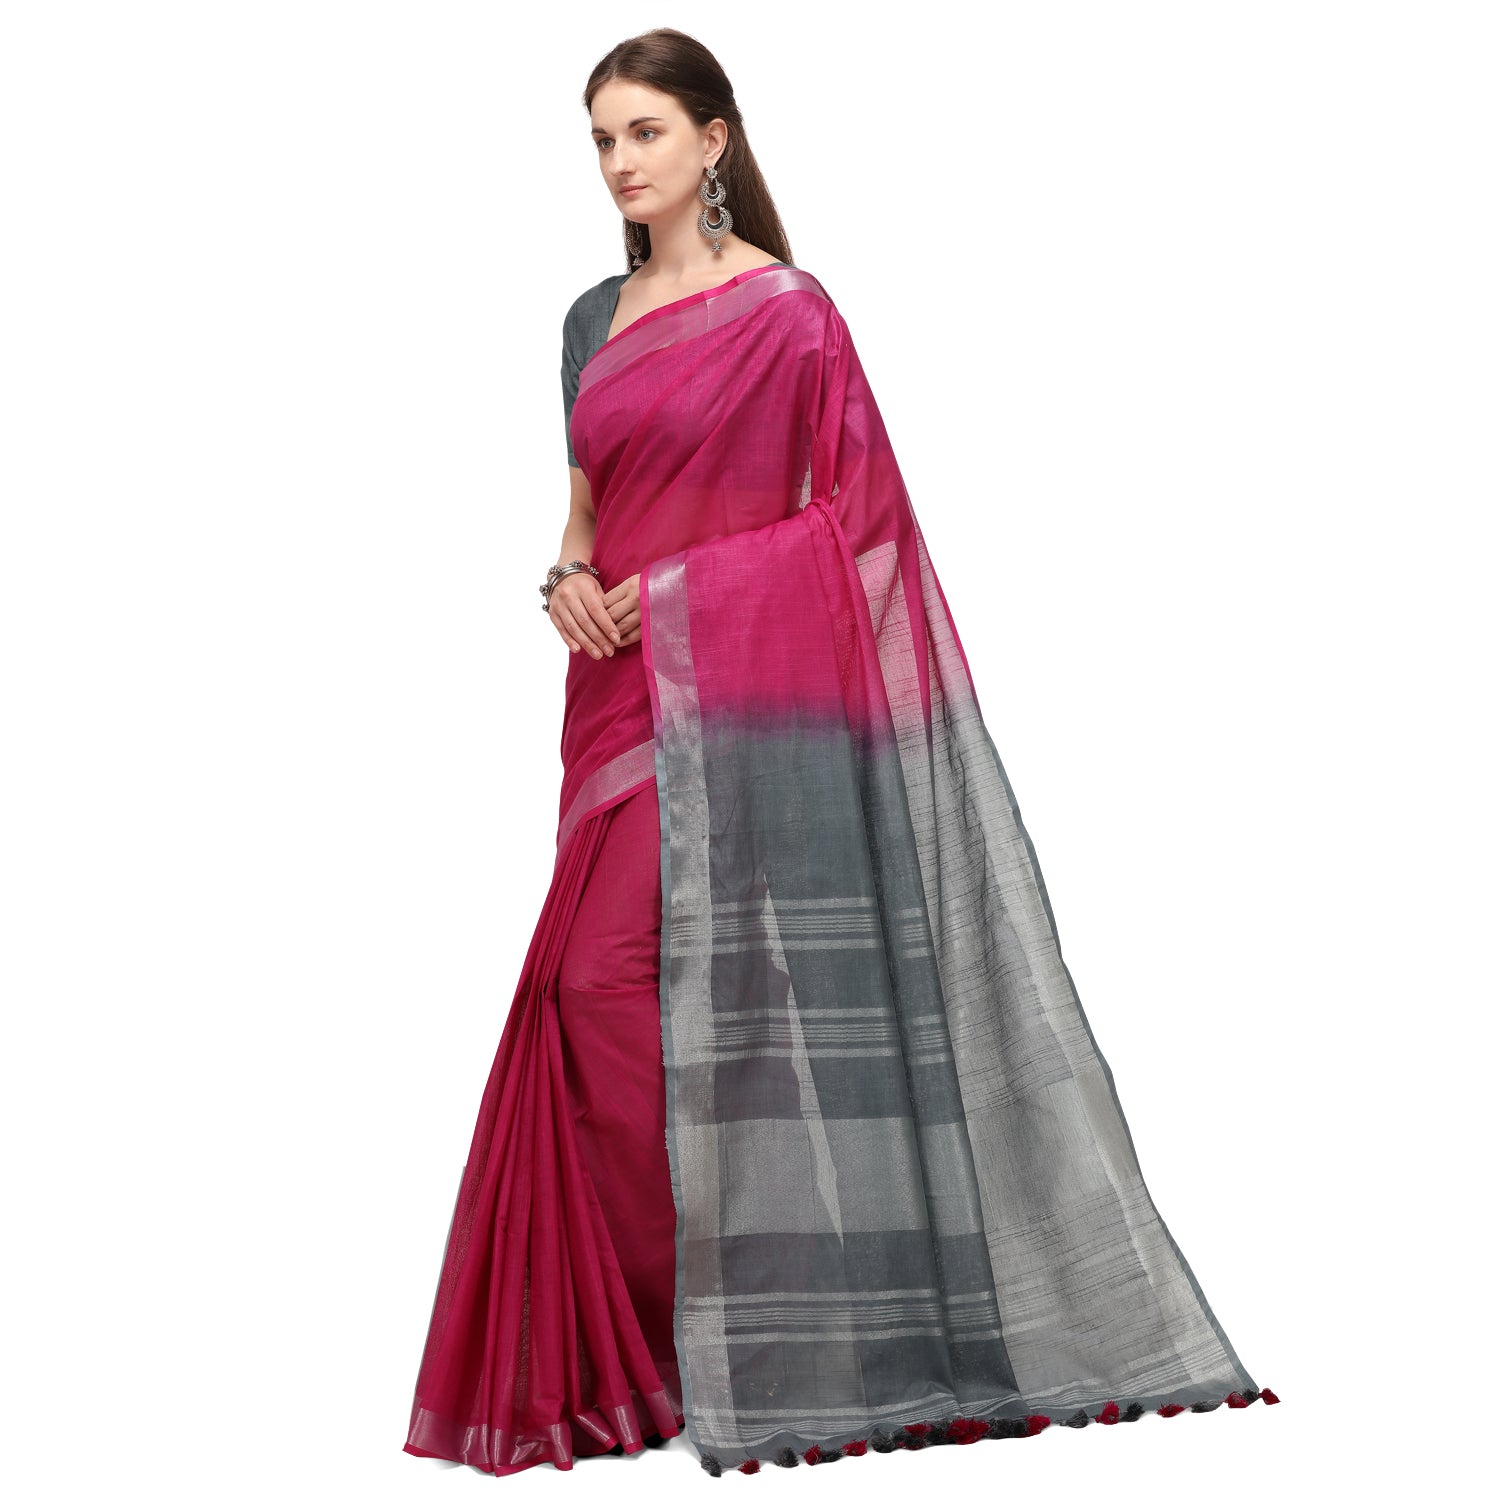 Women's self Woven Solid Textured Dual Shade Daily Wear Cotton Linen Sari With Blouse Piece (Rani) - NIMIDHYA